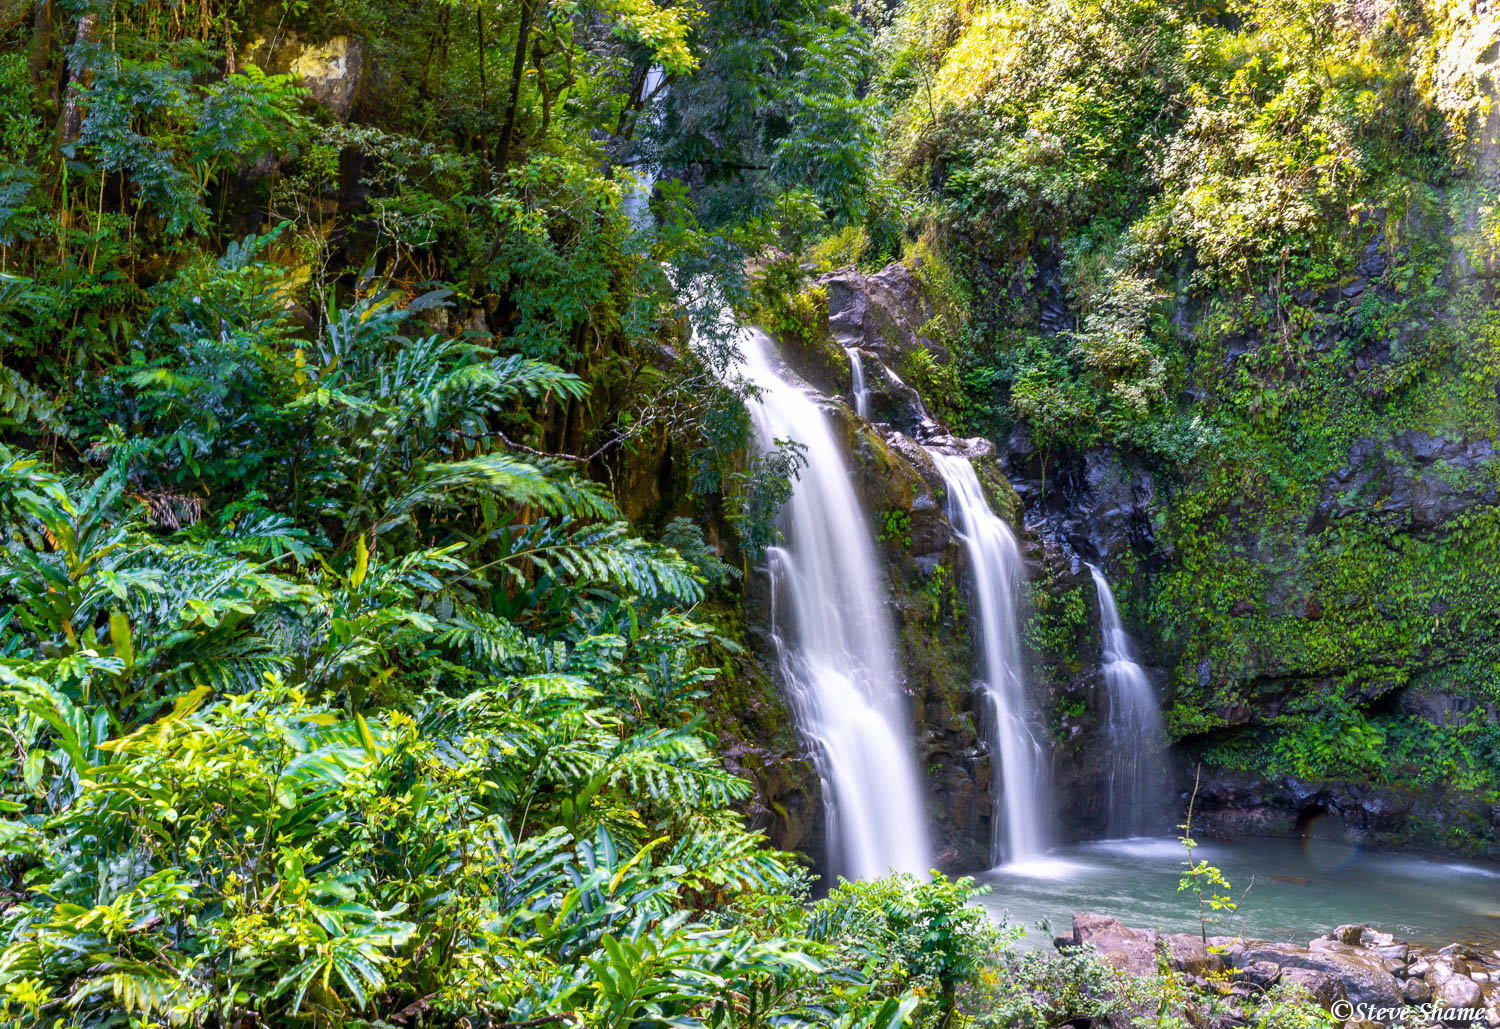 Along the Hana Highway are numerous waterfalls. Here is one of the better ones.